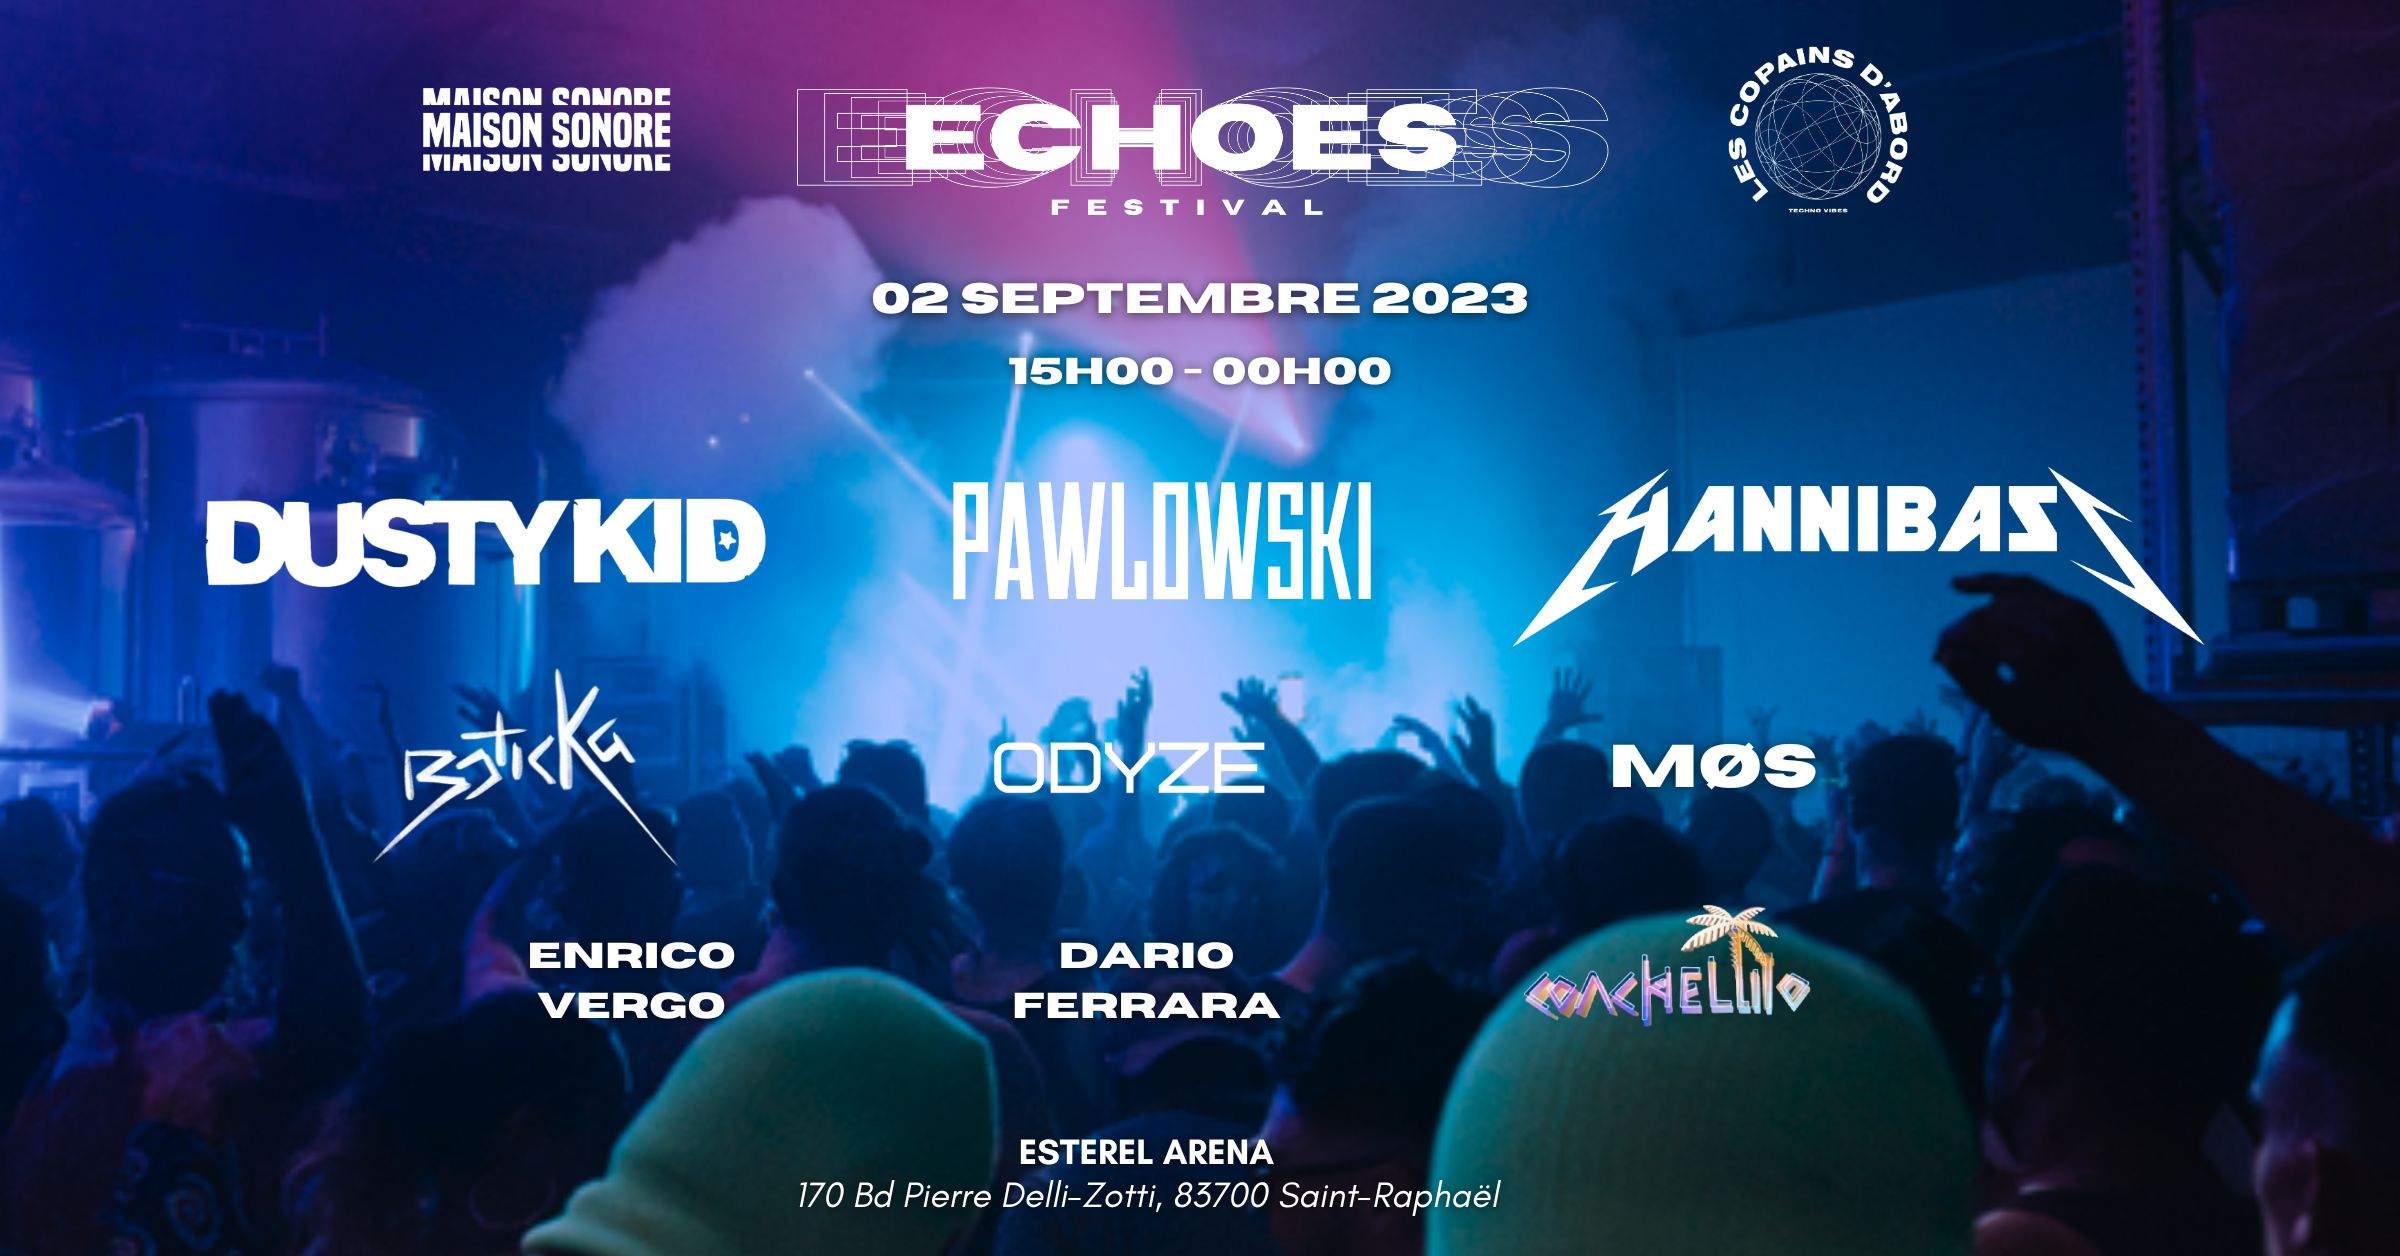 ECHOES FESTIVAL - フライヤー表